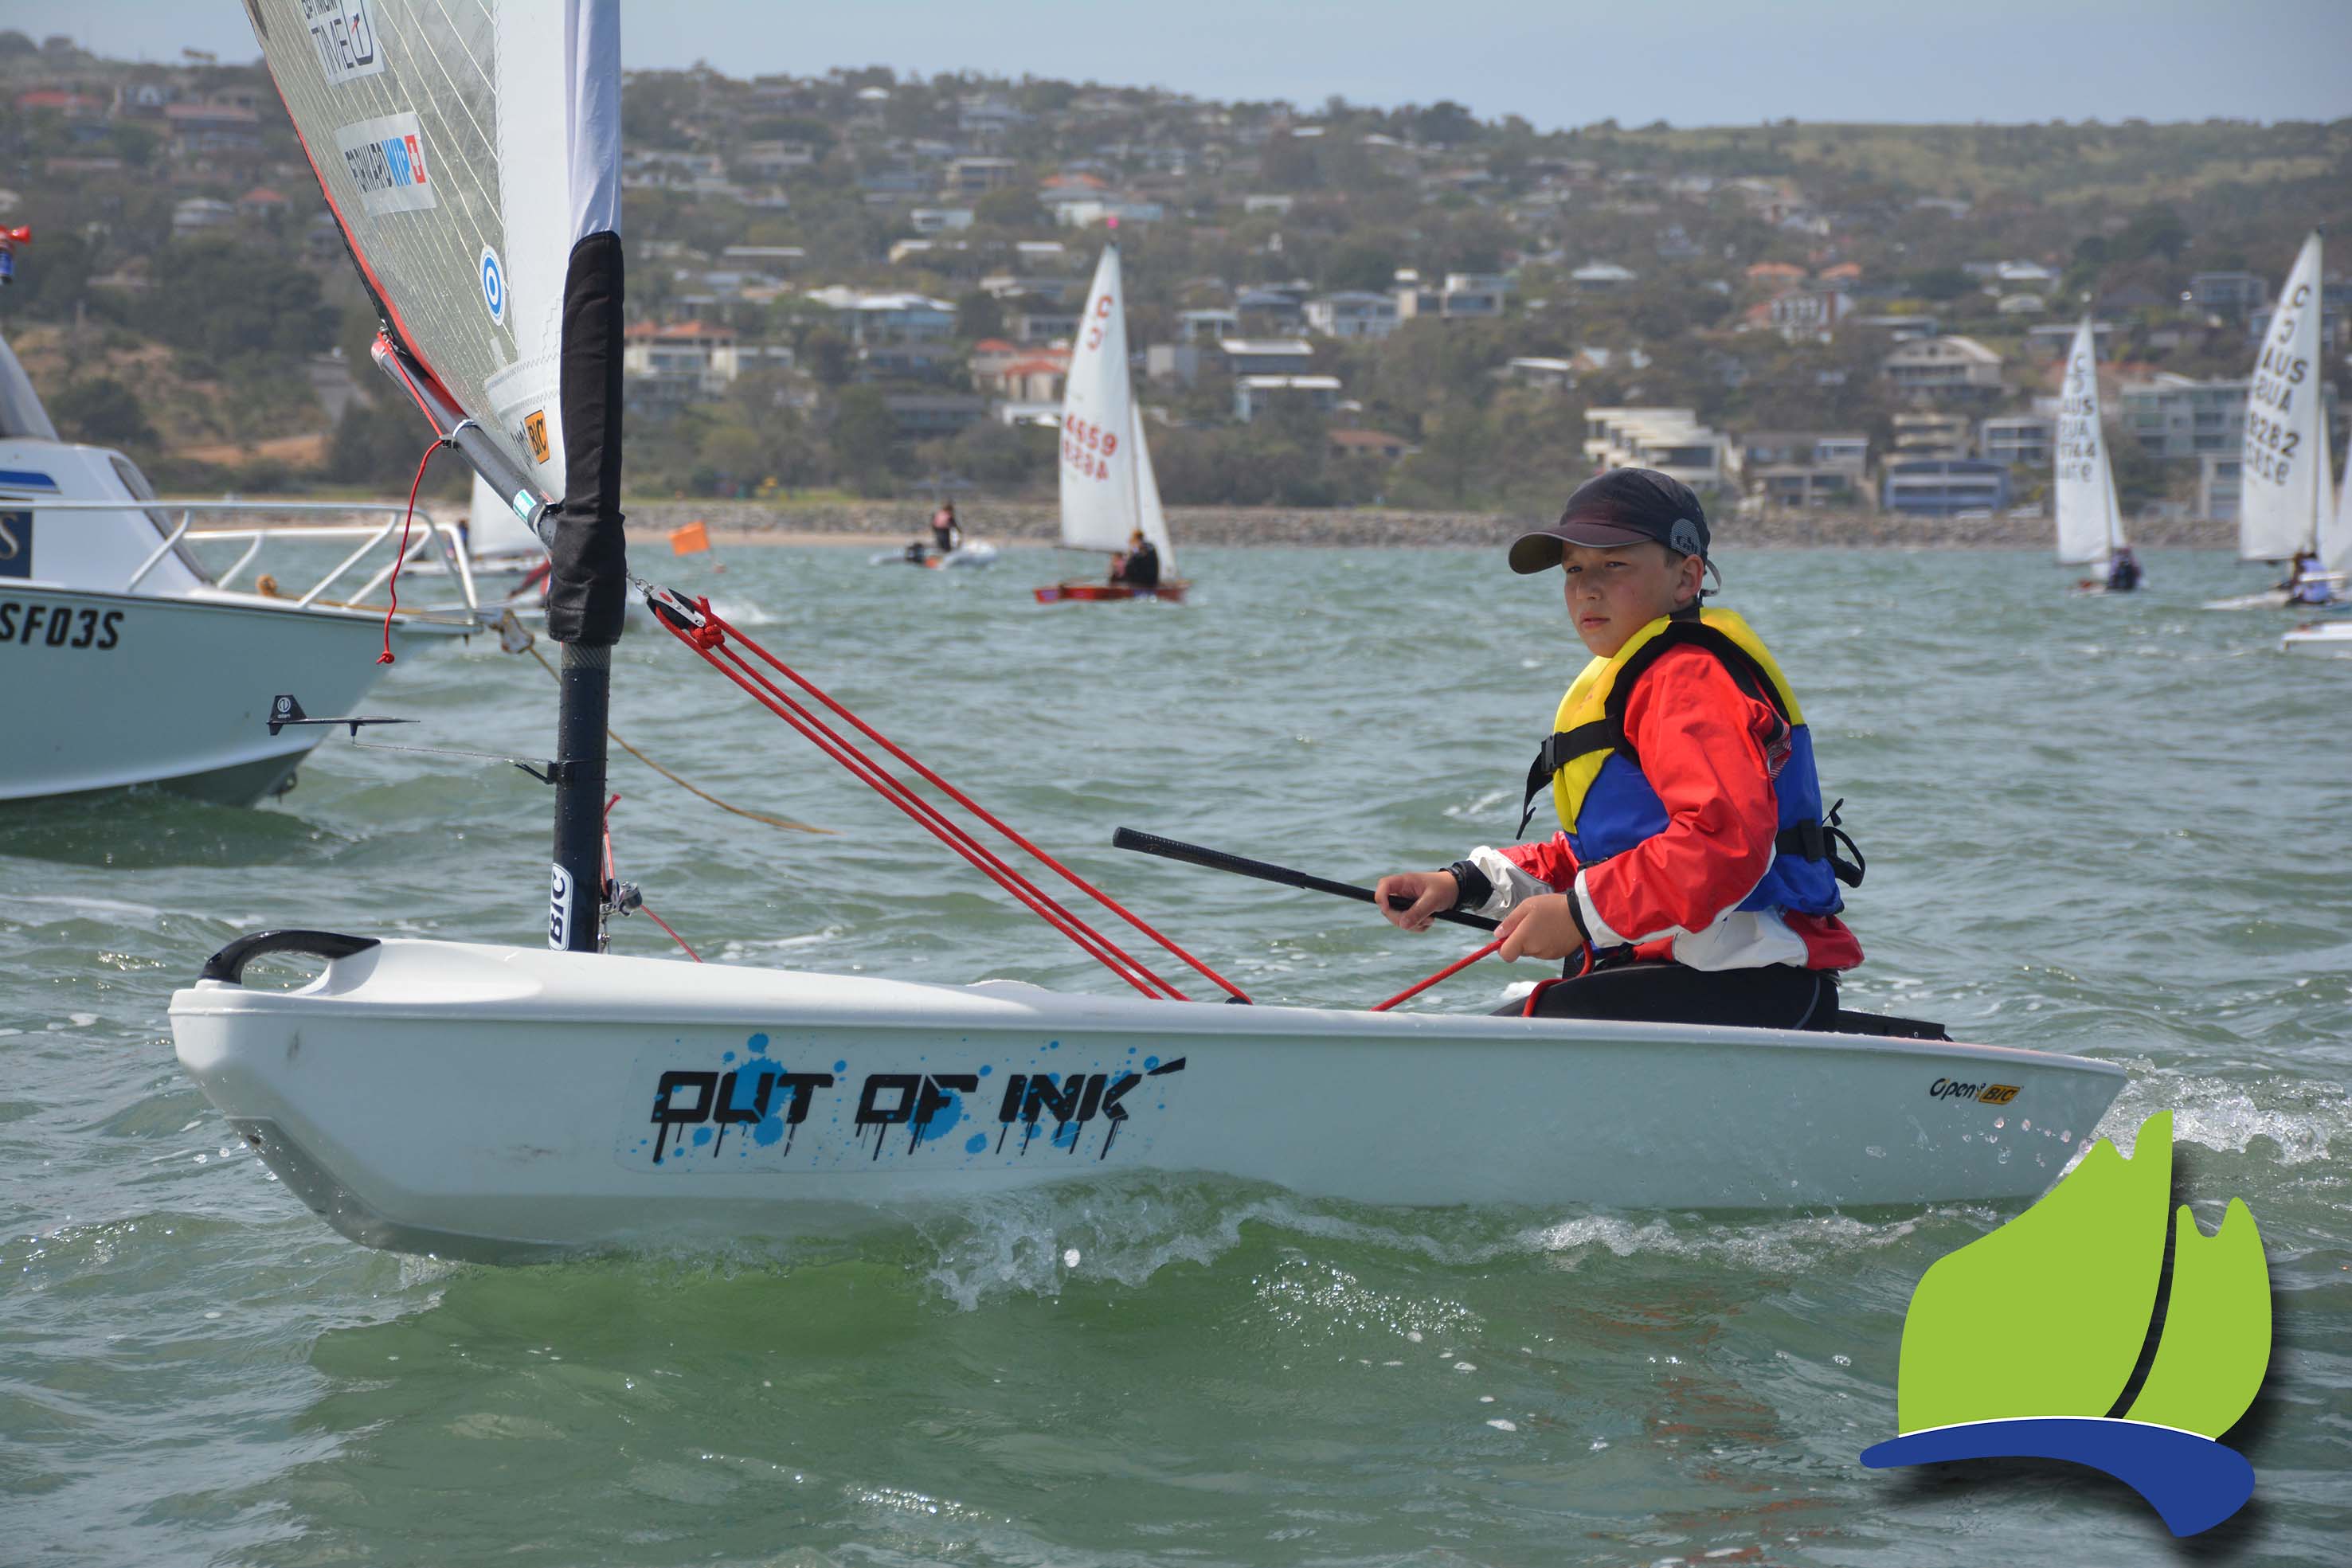 Adelaide's Alexander Lebedev sailing in the Open Bic at the recent Tri Series event.